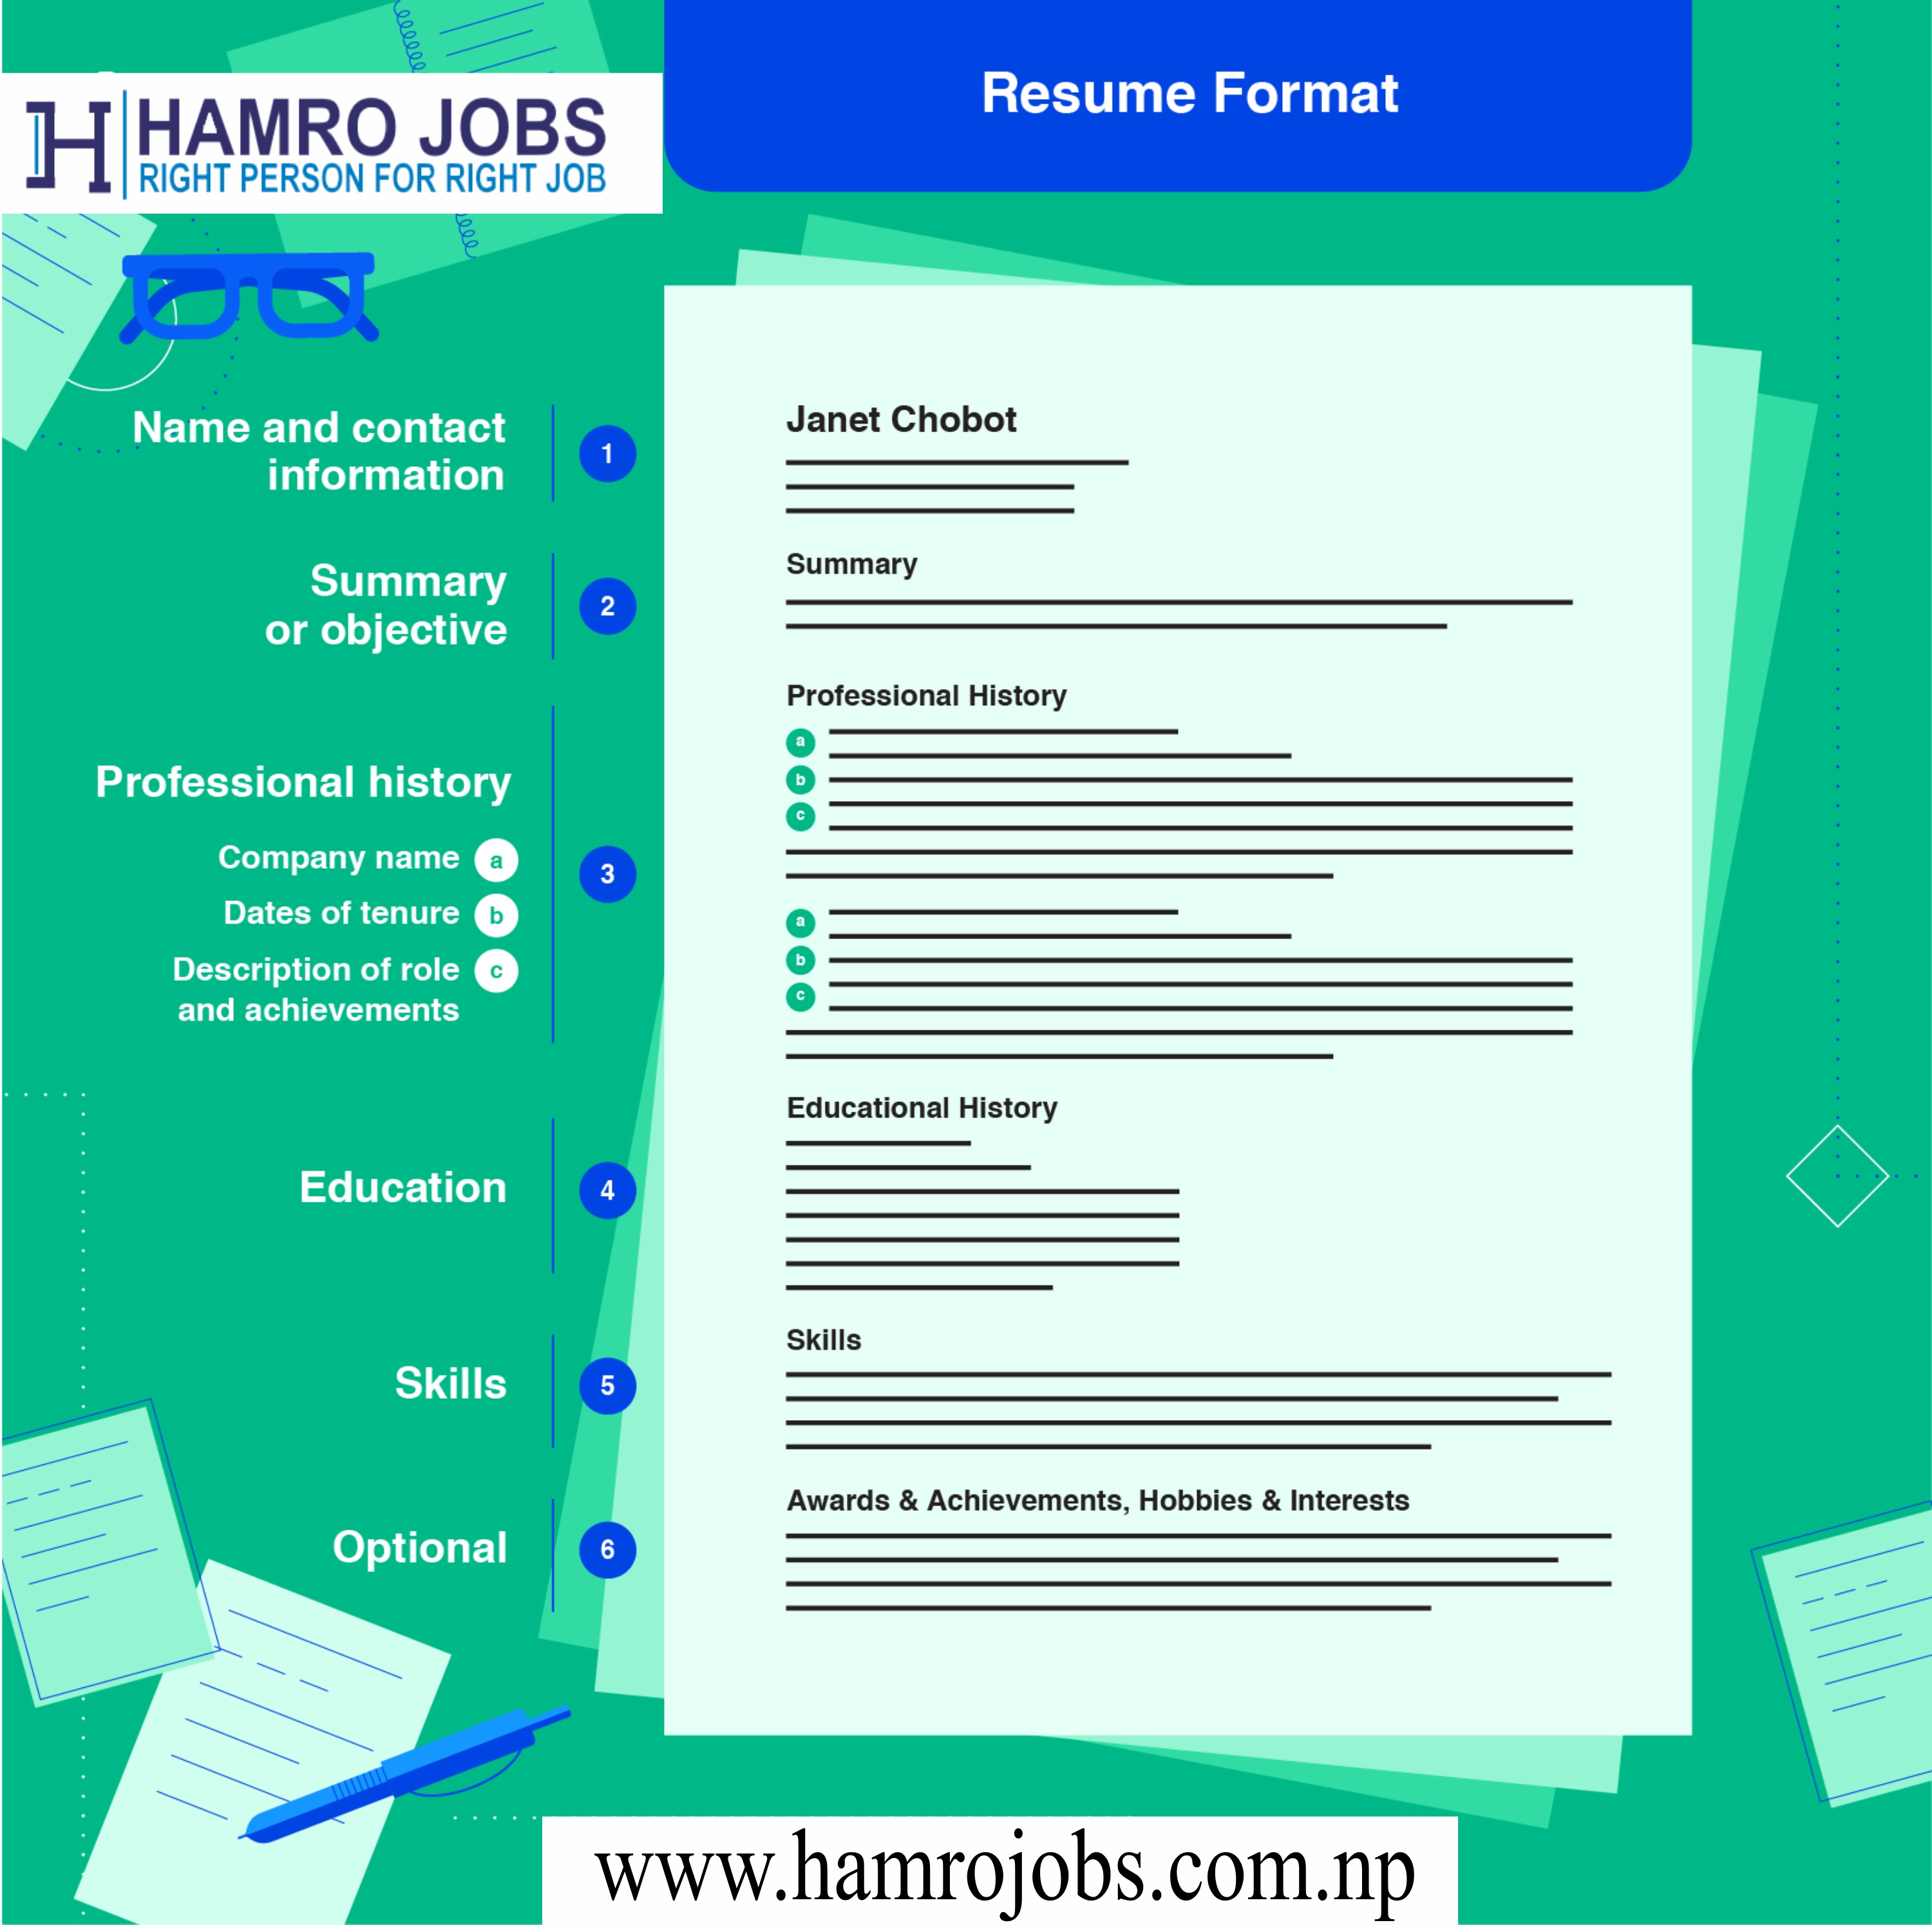 resume-writing-tips-to-help-you-land-a-job-2